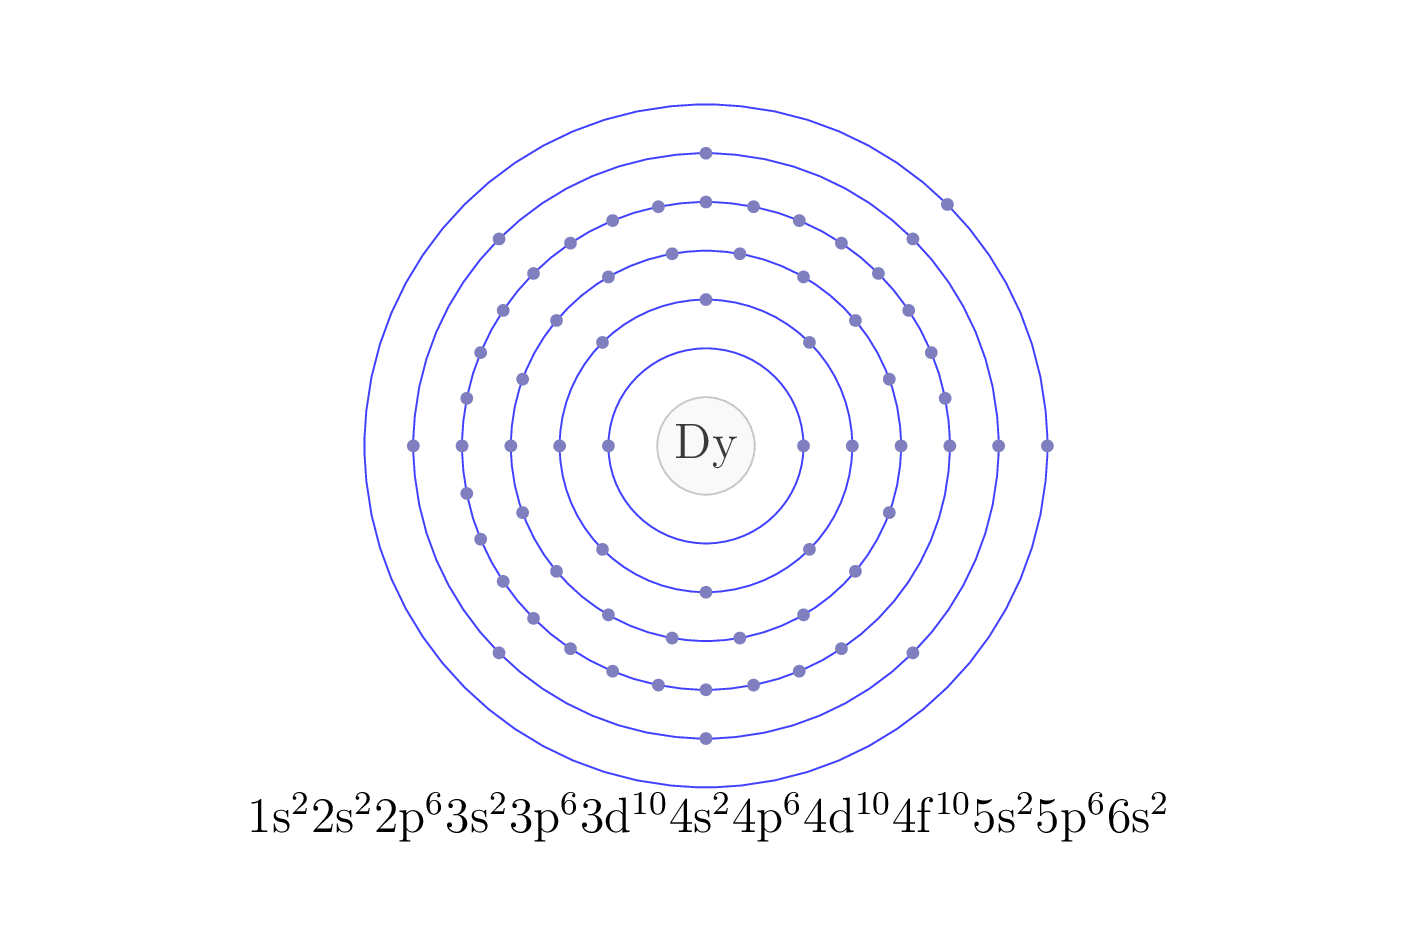 electron configuration of element Dy